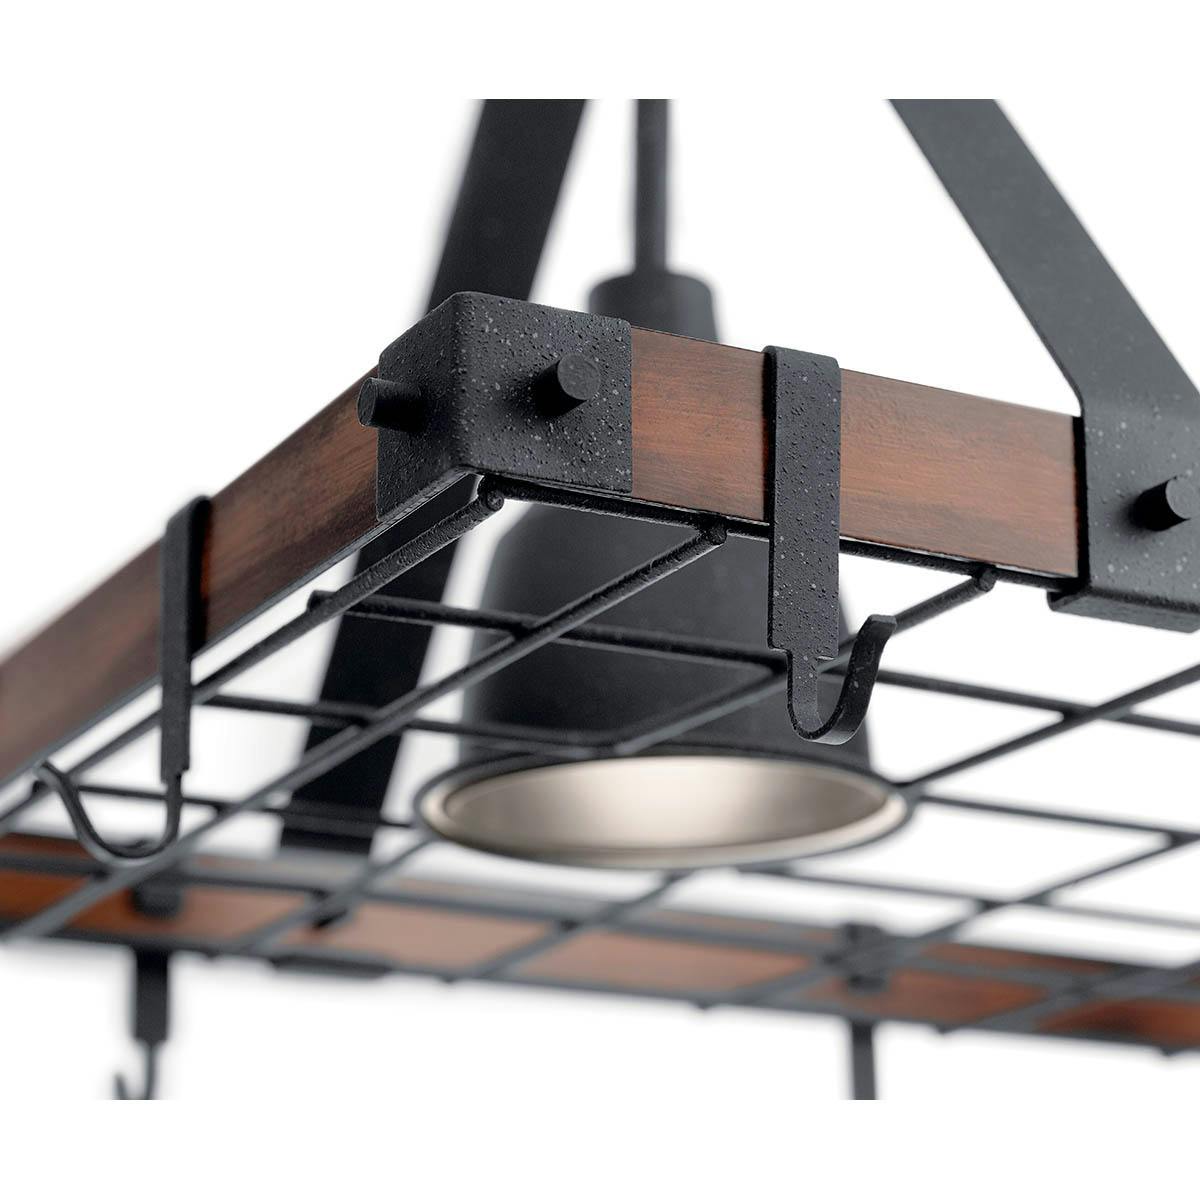 Close up view of the Barrington 34"x20" Lighted Pot Rack Black on a white background